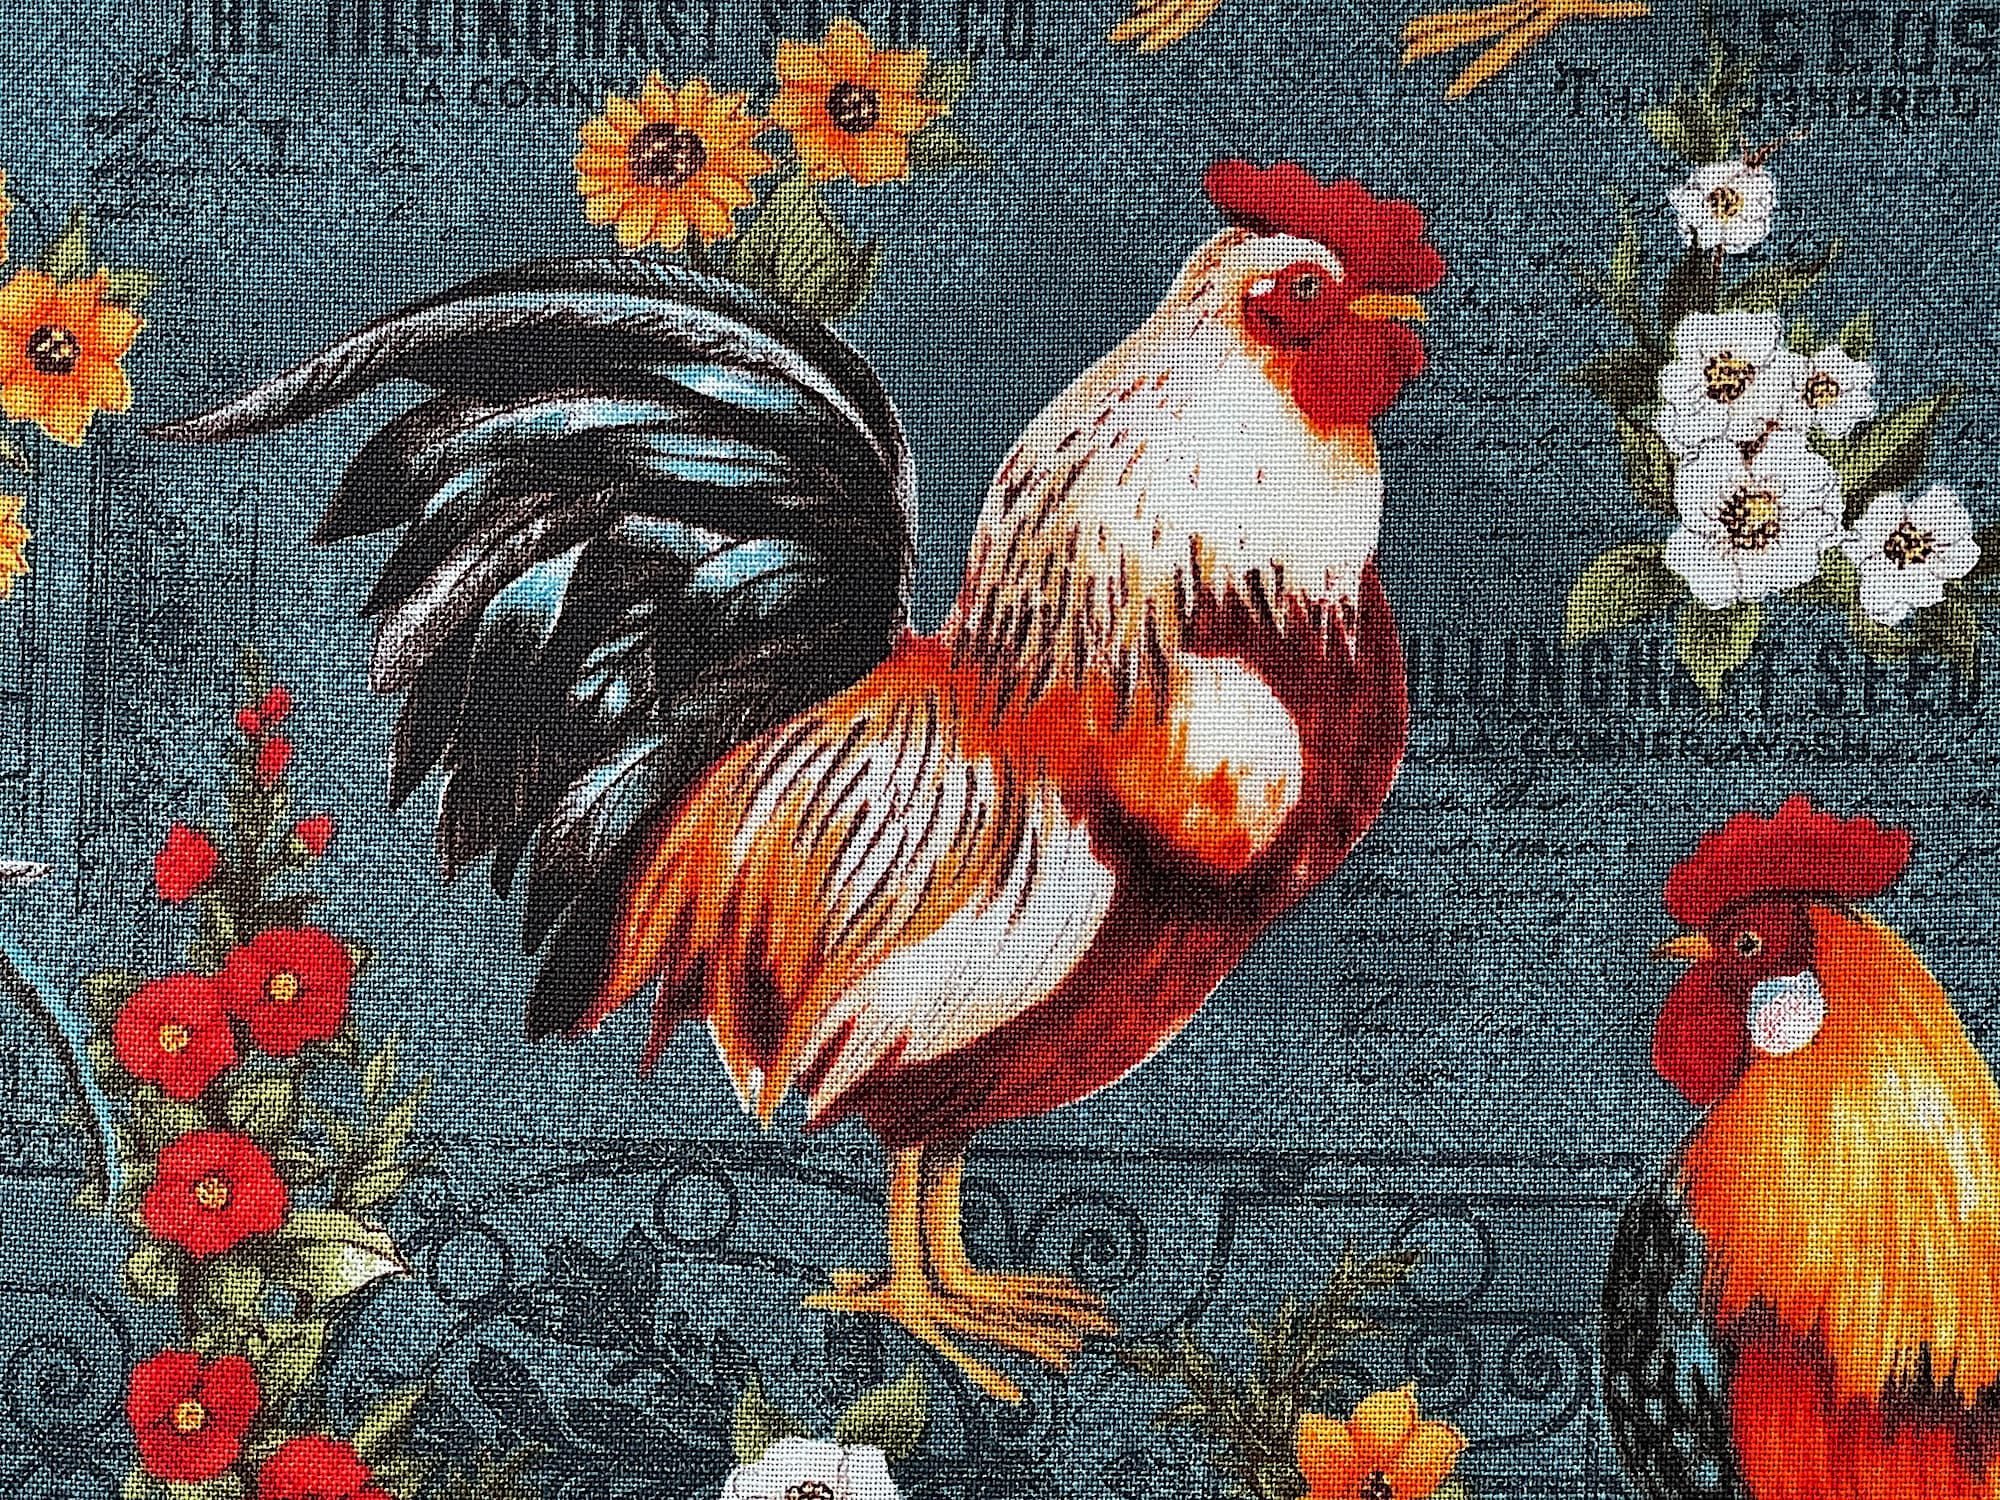 Close up of a rooster that is white, grey, black and shades of red to orange.